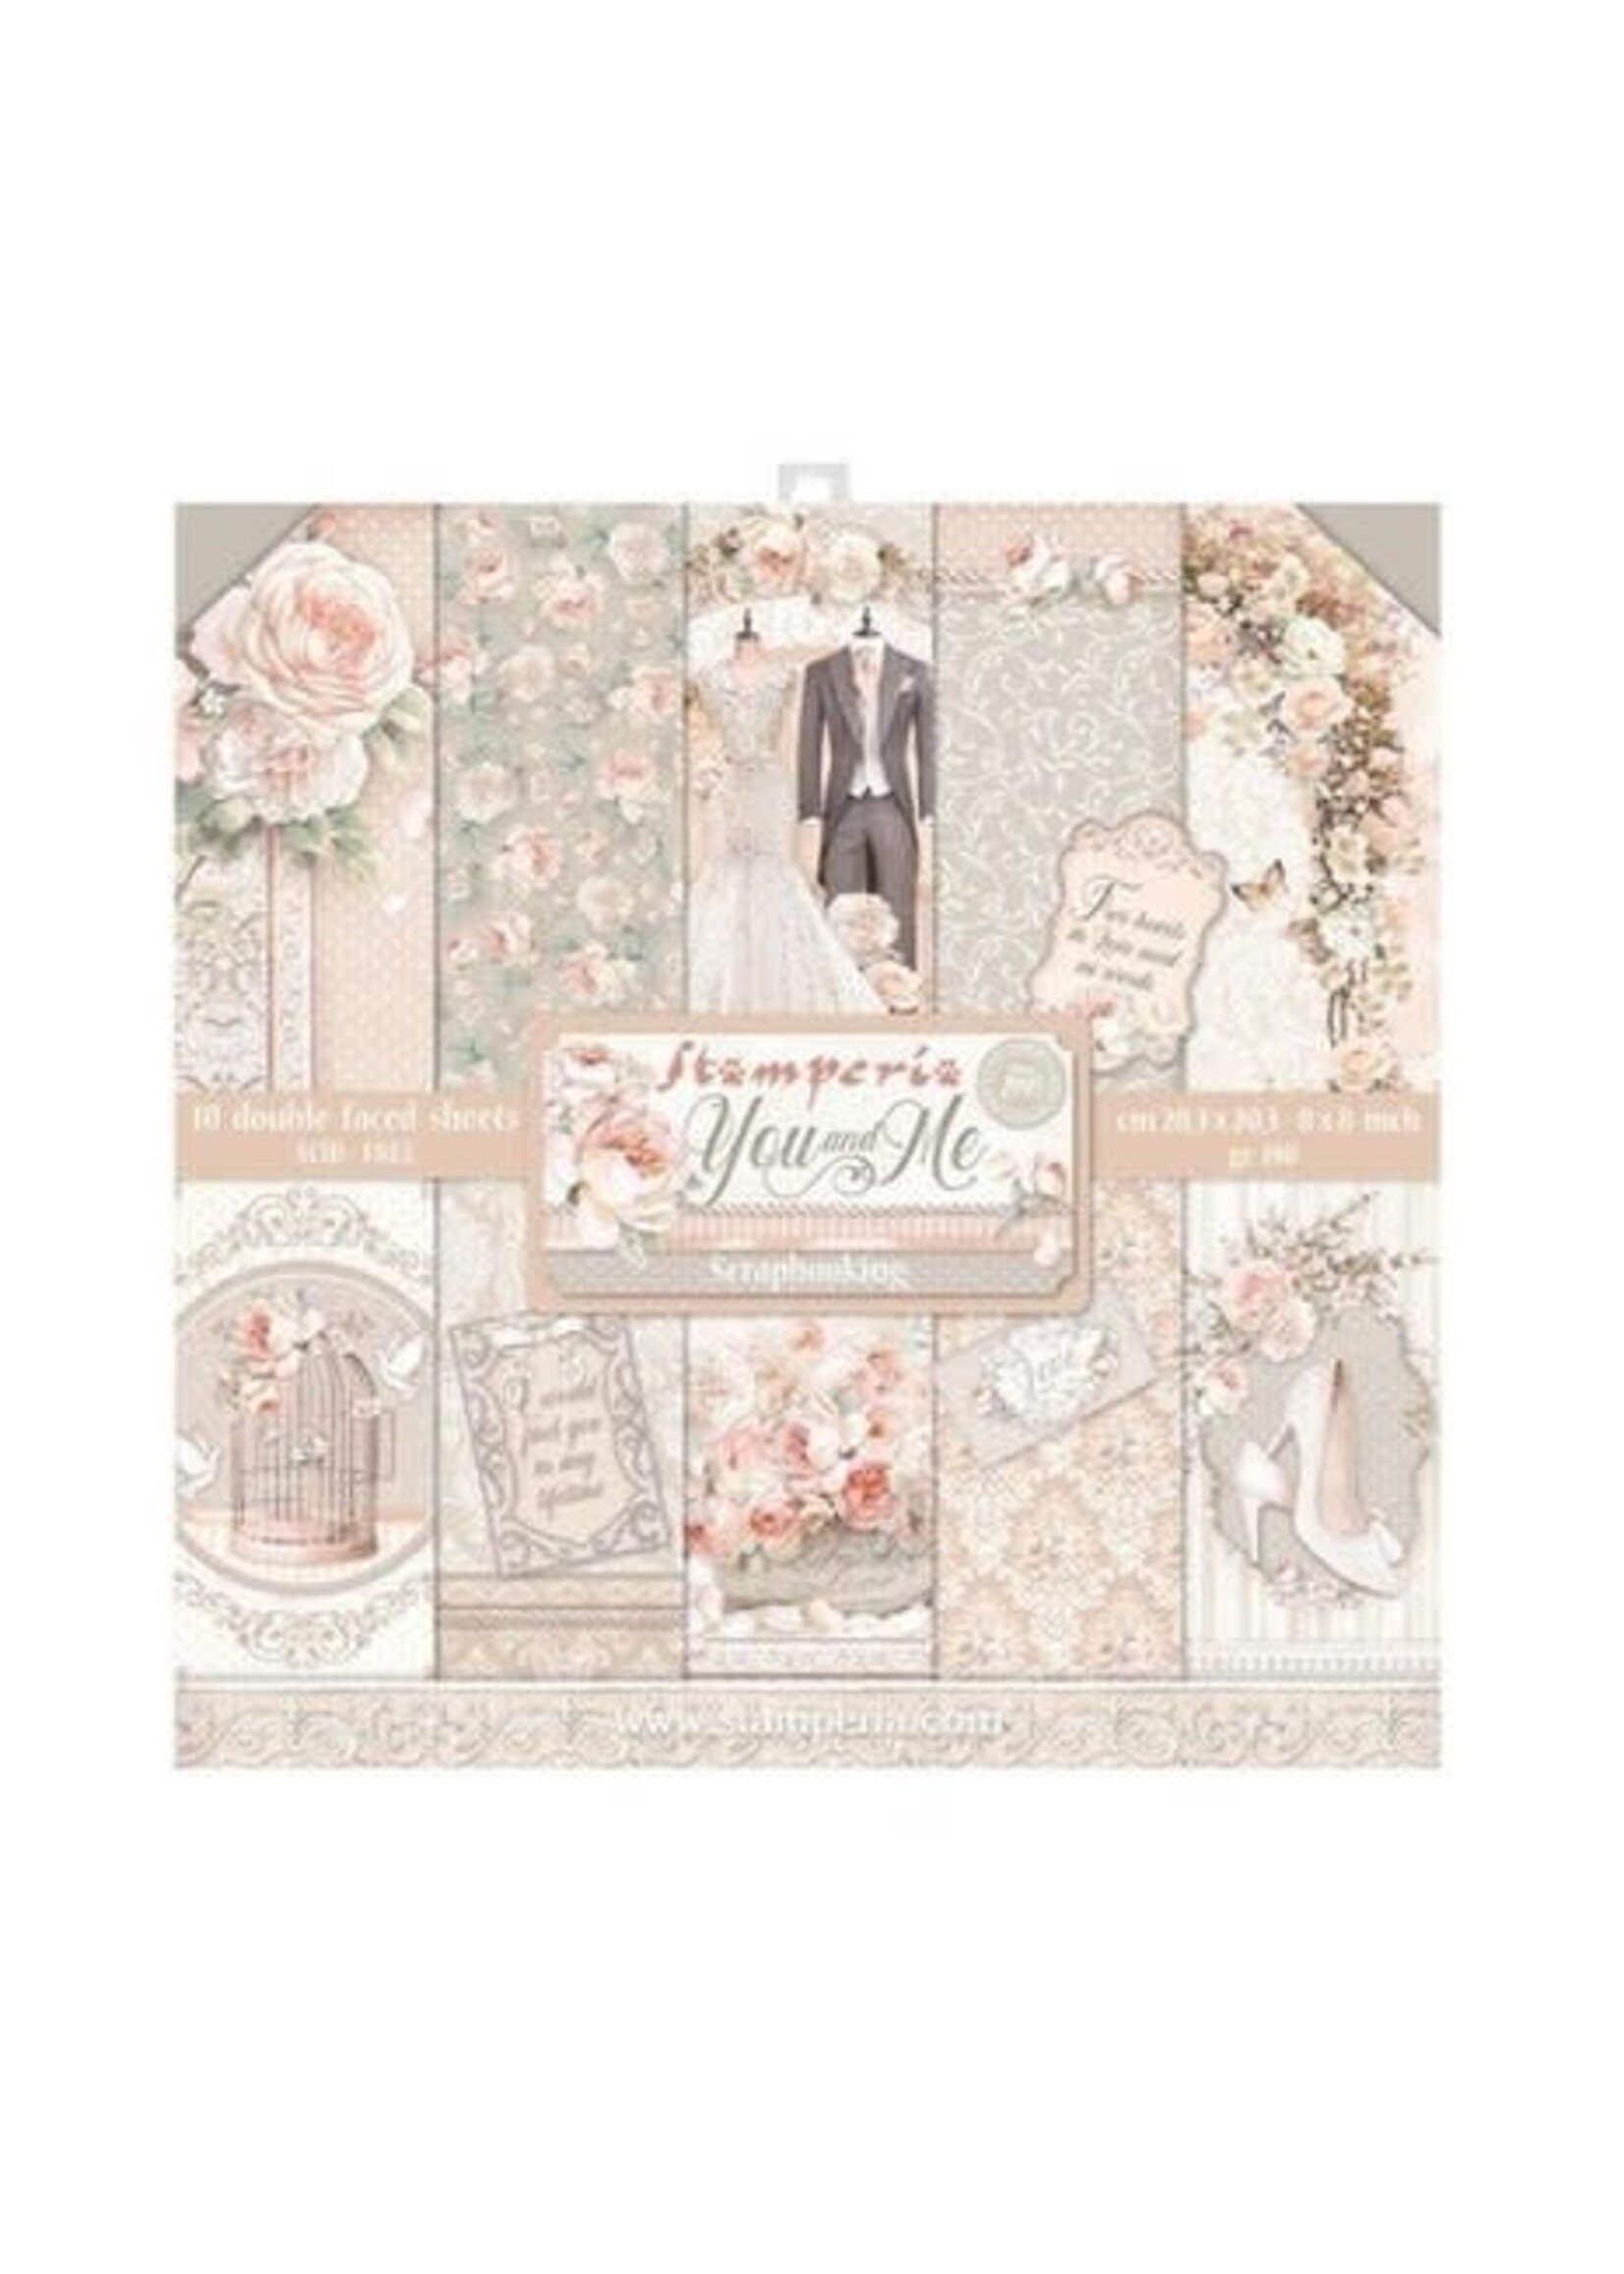 Stamperia You and Me 8x8 Inch Paper Pack (SBBS60)